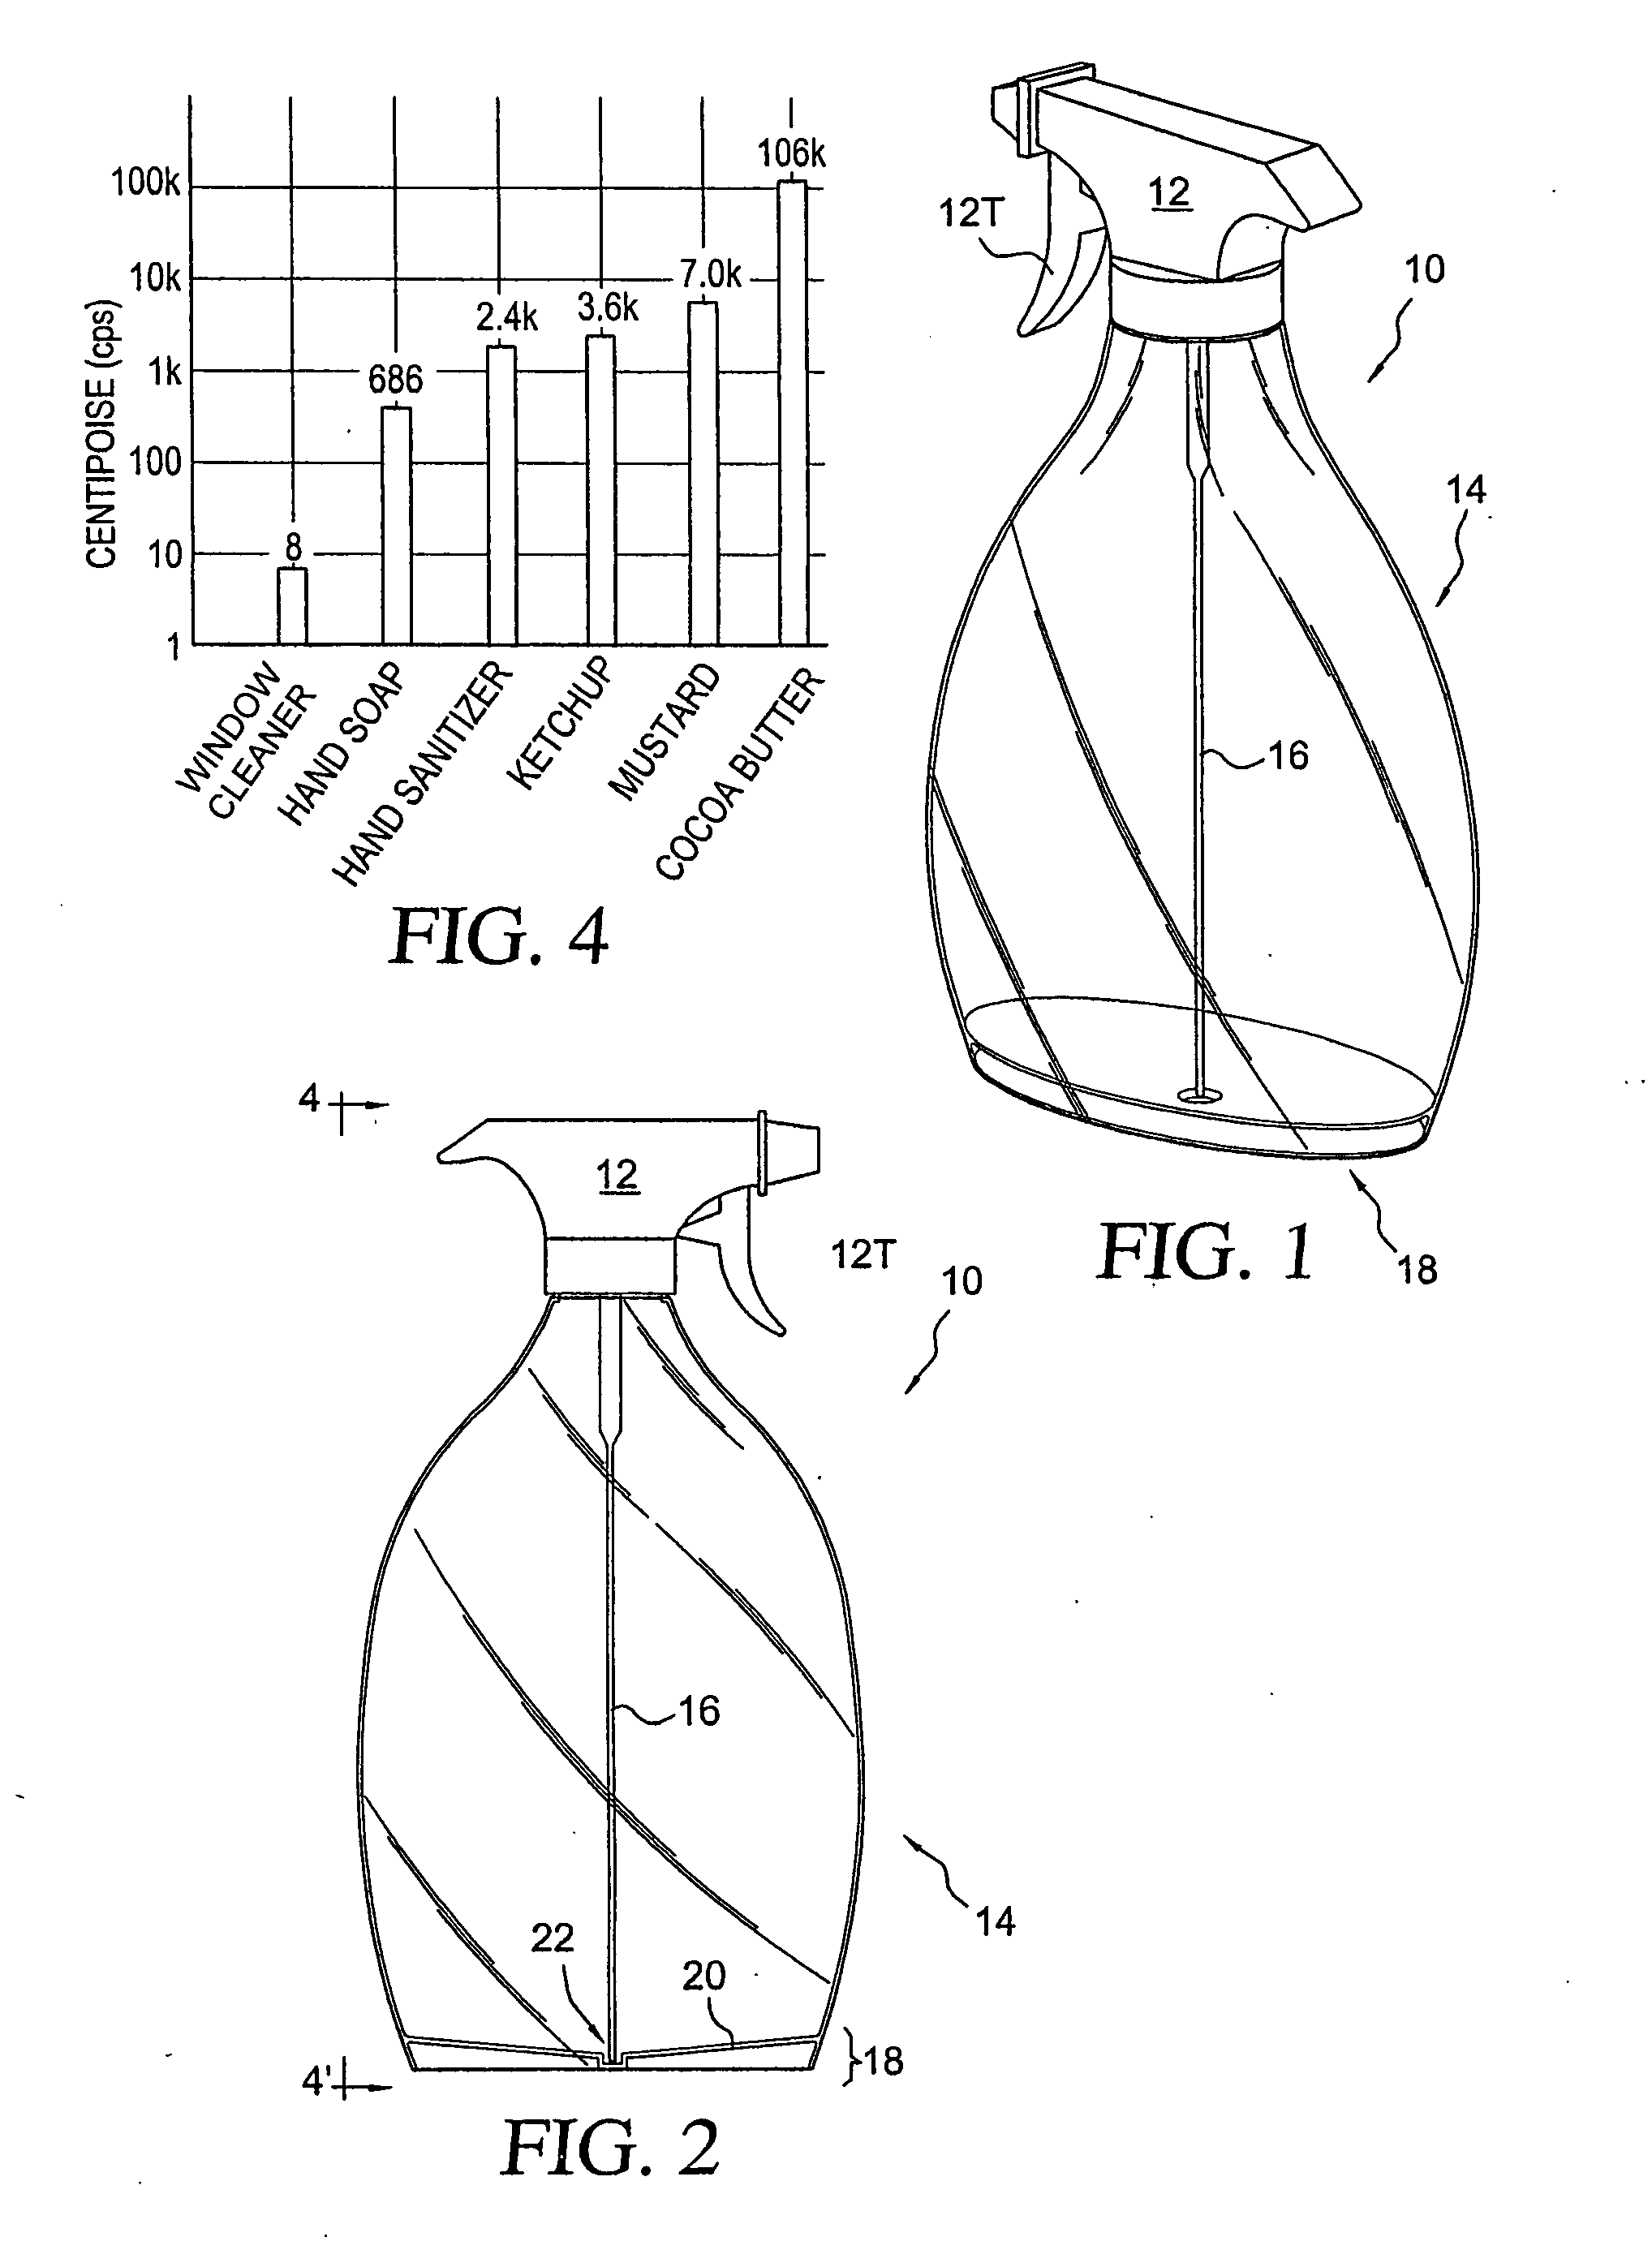 Liquid  pump dispensing system for liquids having wide ranges of viscosities with no waste